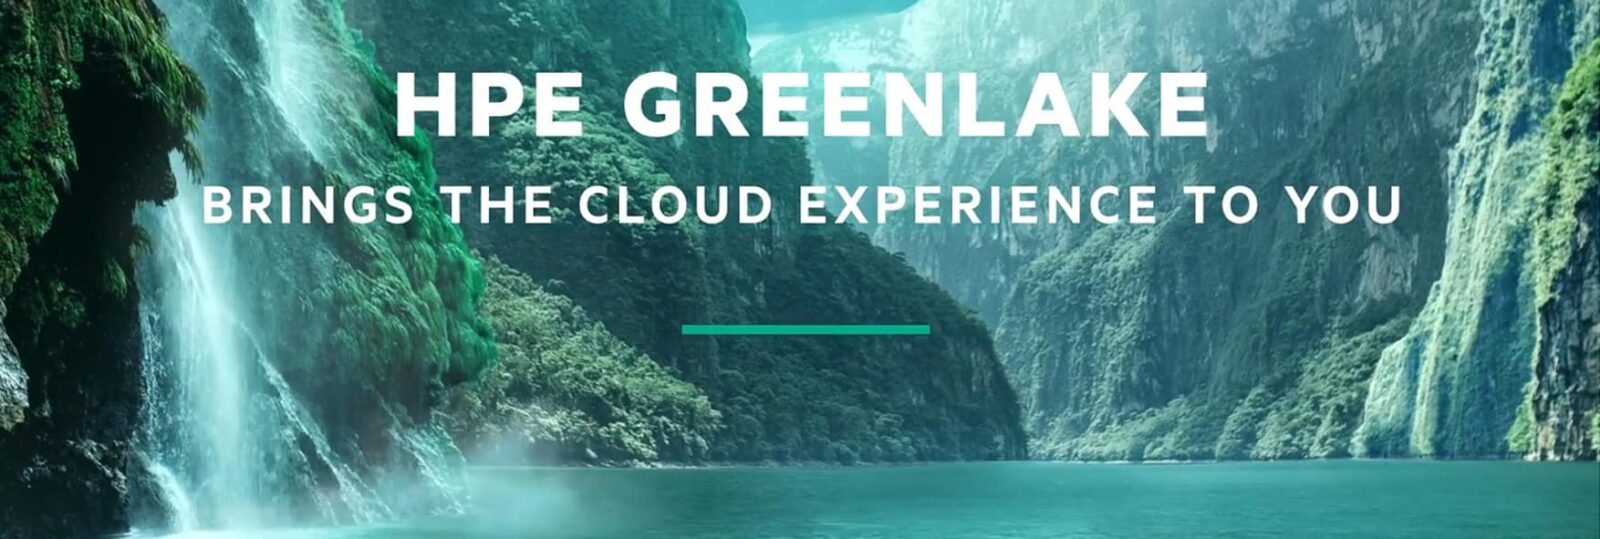 Hpe Greenlake As A Service 1